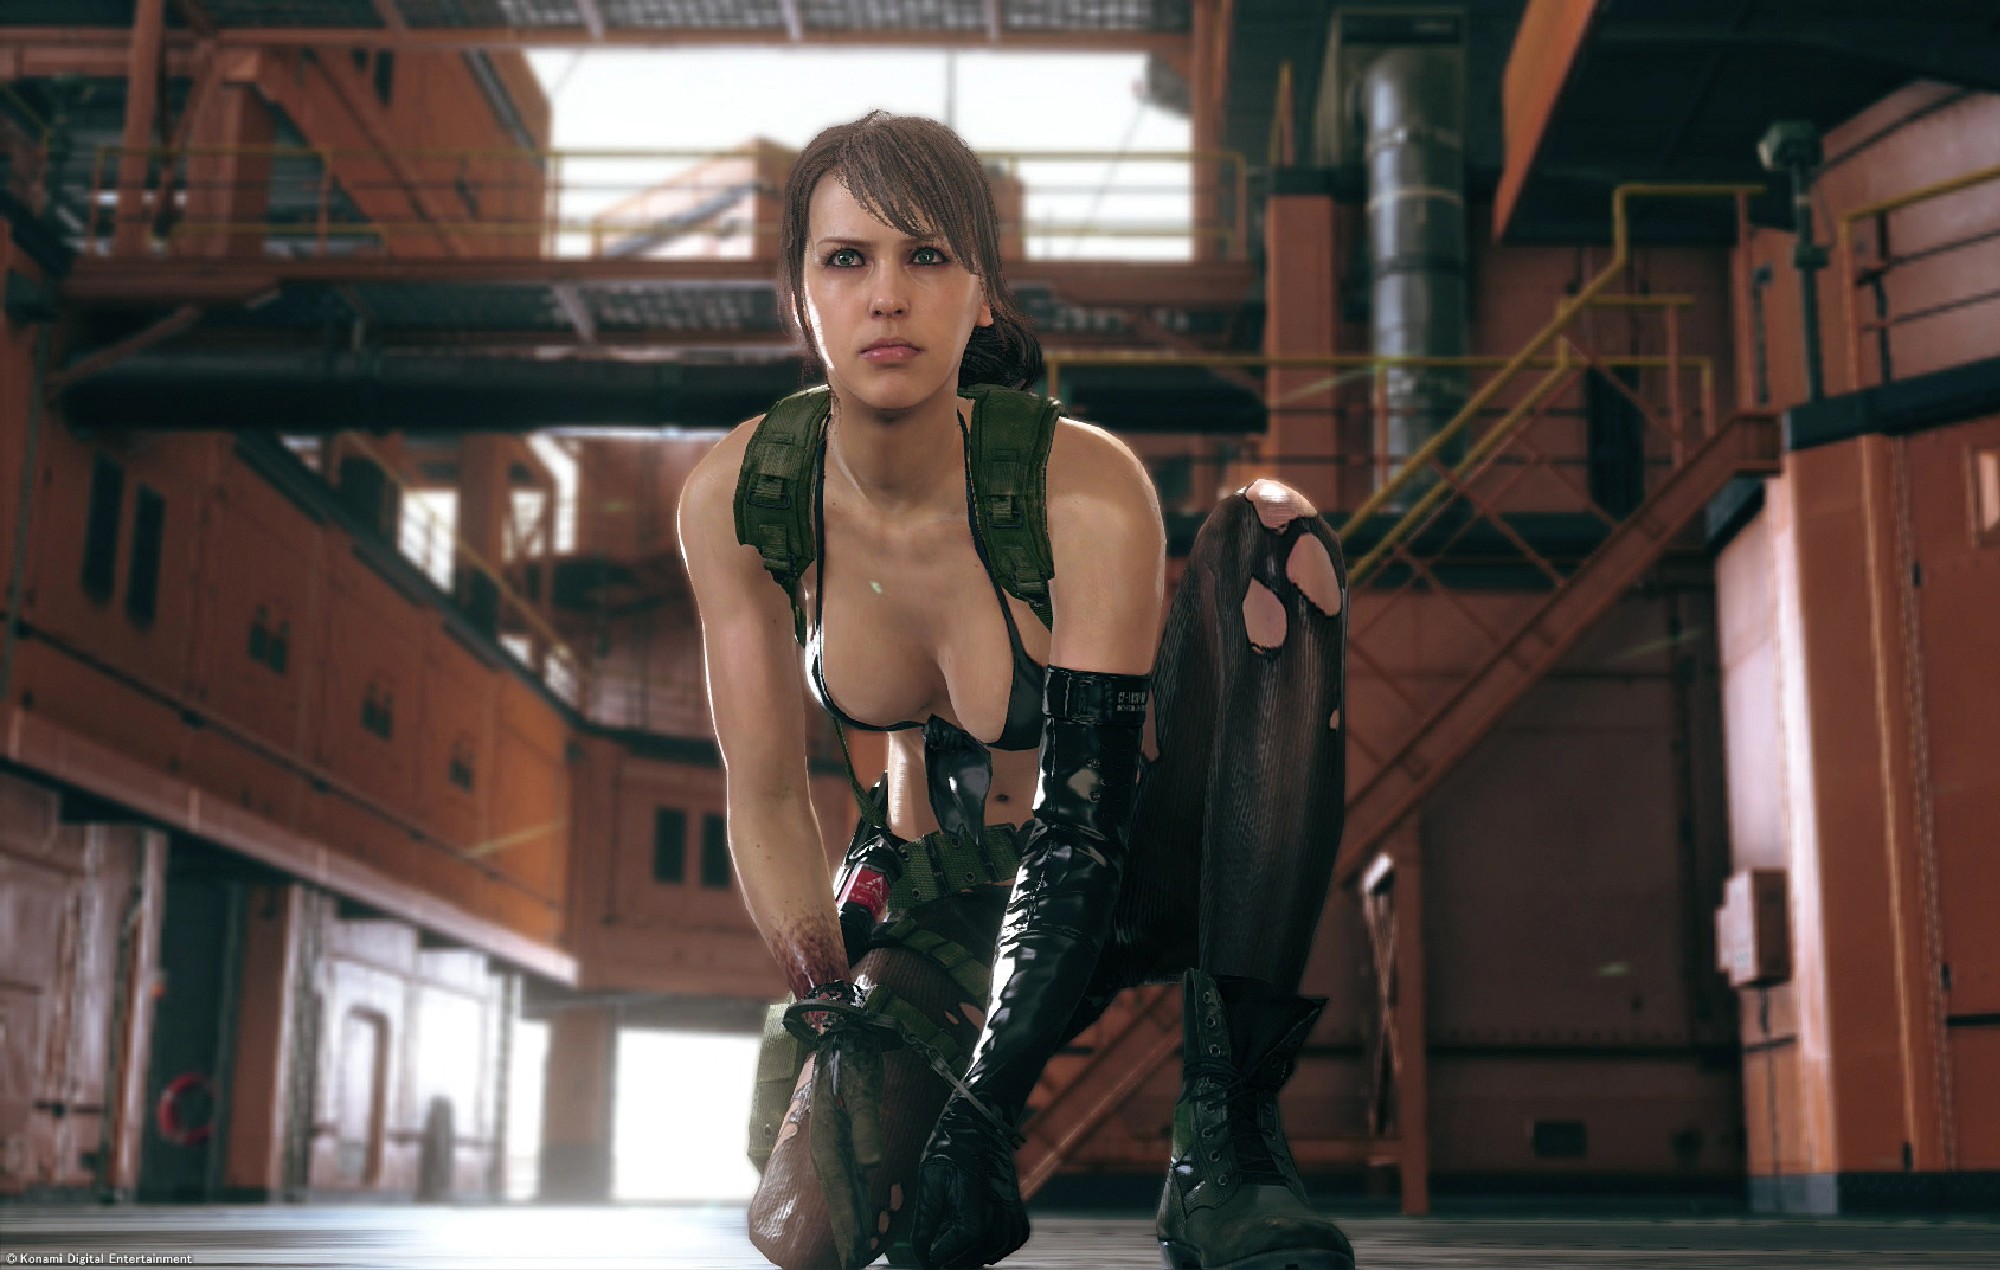 ‘Metal Gear Solid 5’ Quiet actor says her design was “not practical at all”